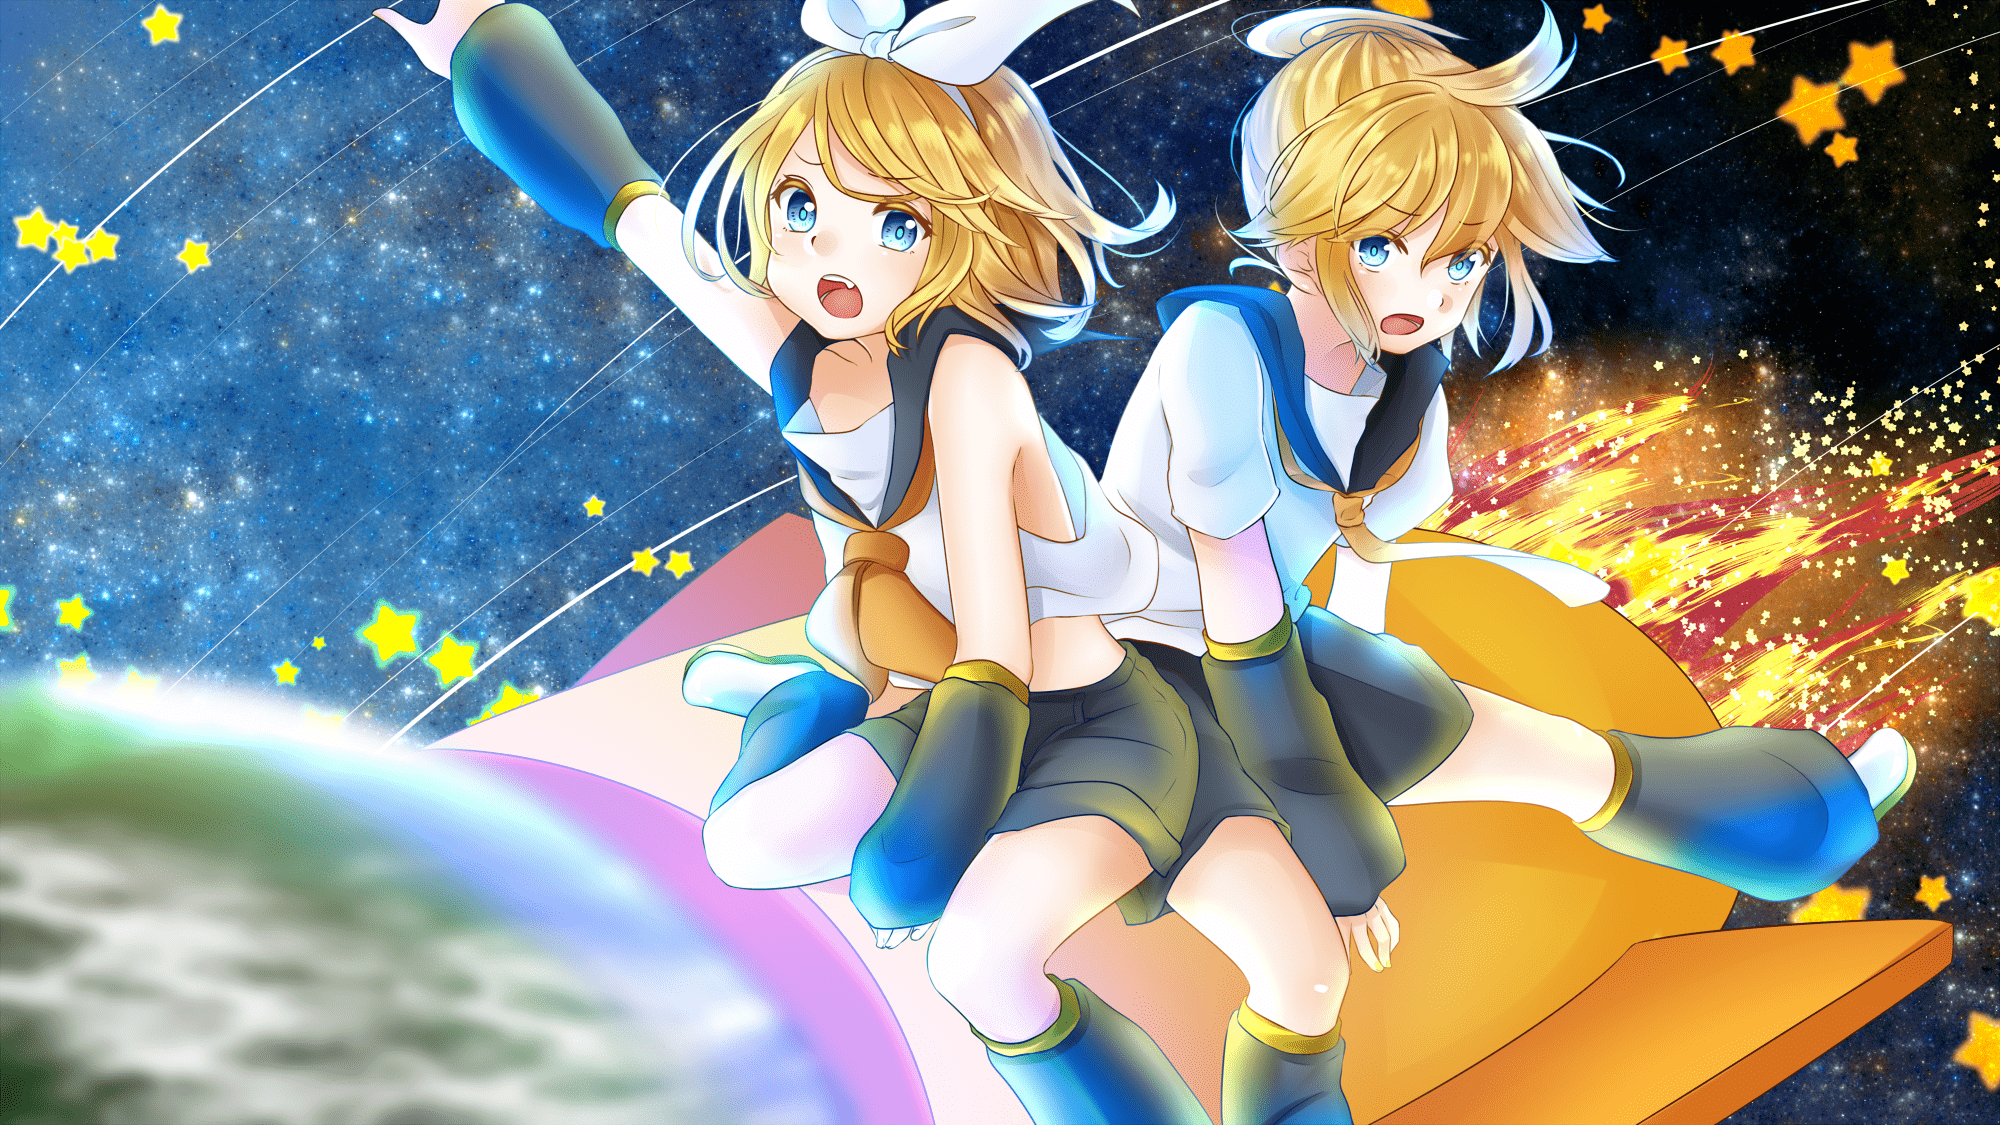 Kagamine Rin Wallpapers - Top Free Kagamine Rin Backgrounds